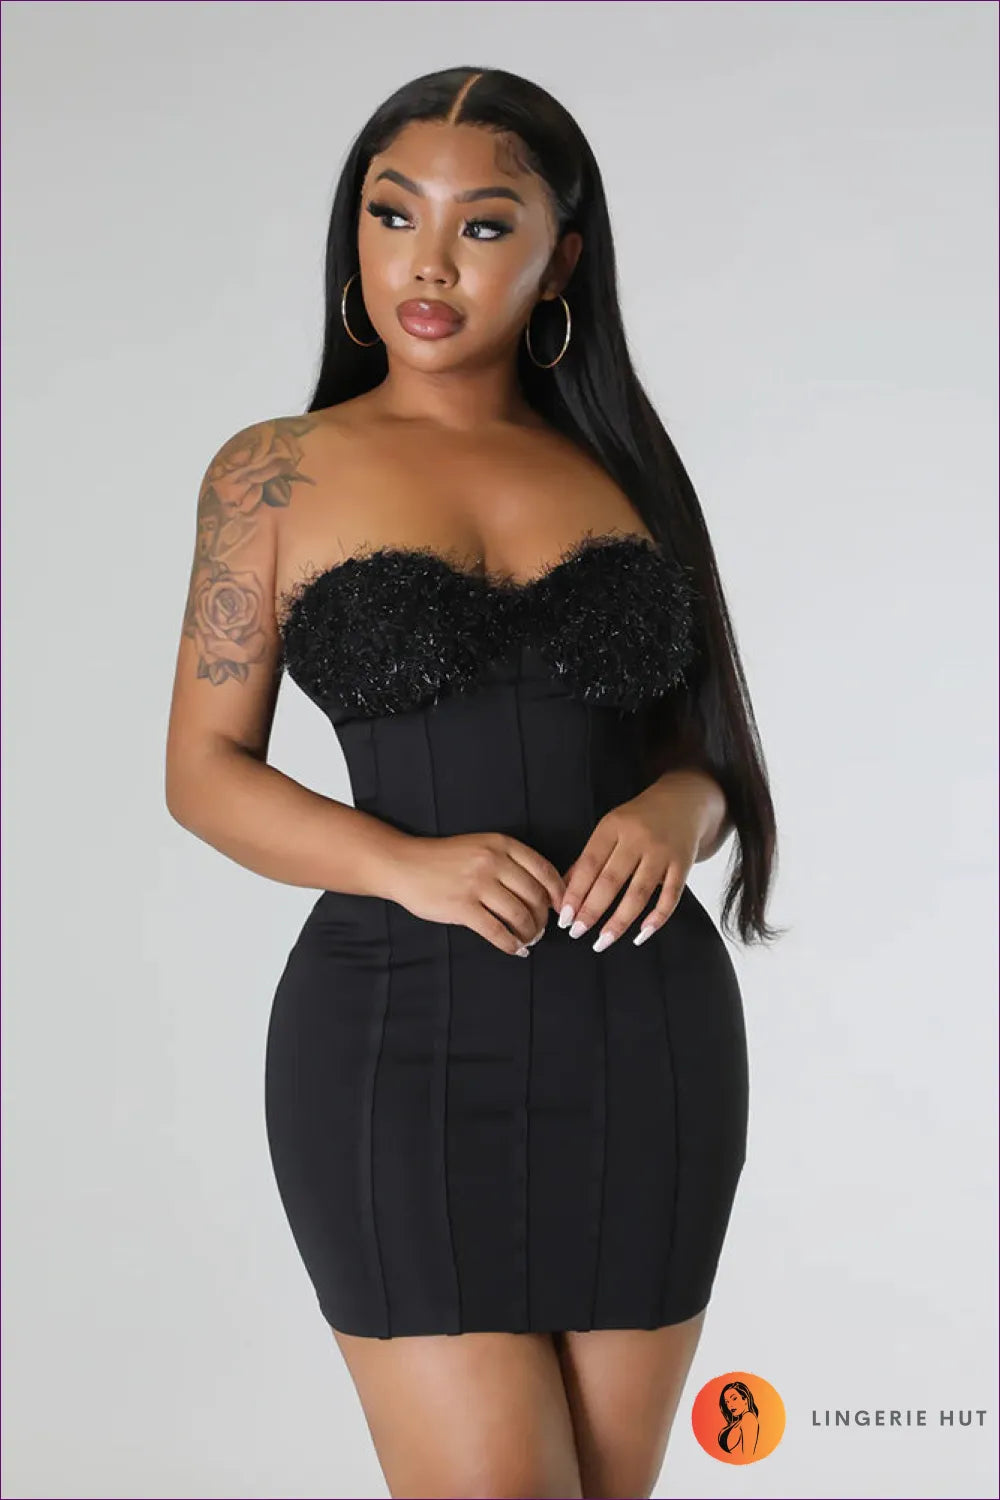 Make a Fashion Statement With Our Corset Two Piece Ribbed Dress. Flaunt Your Figure In This Form-flattering,